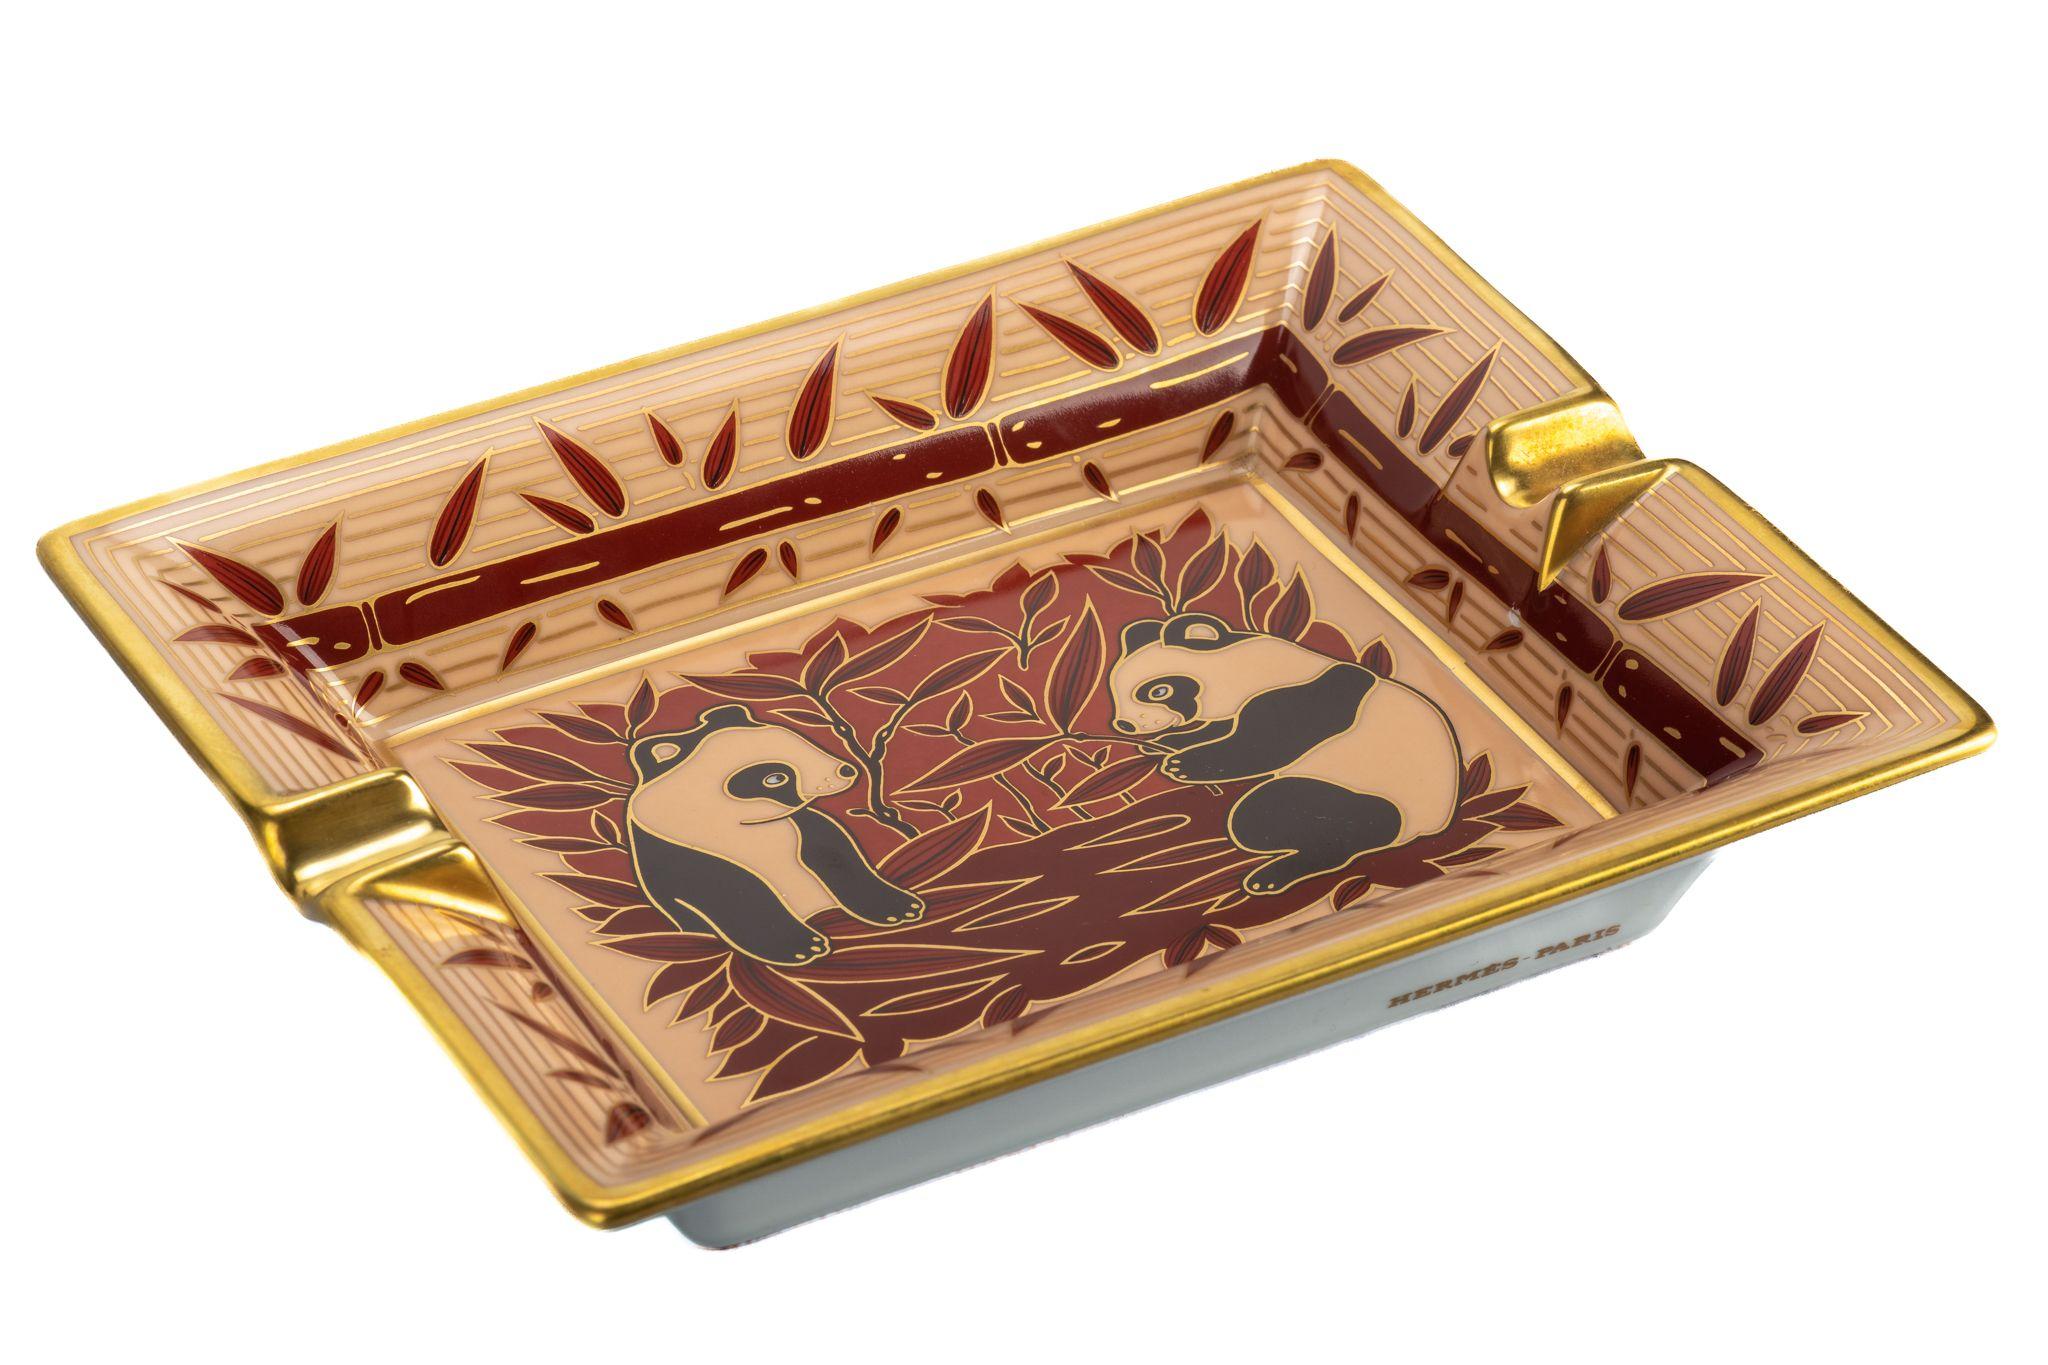 Hermes dark red and cream porcelain ashtray with pandas design.